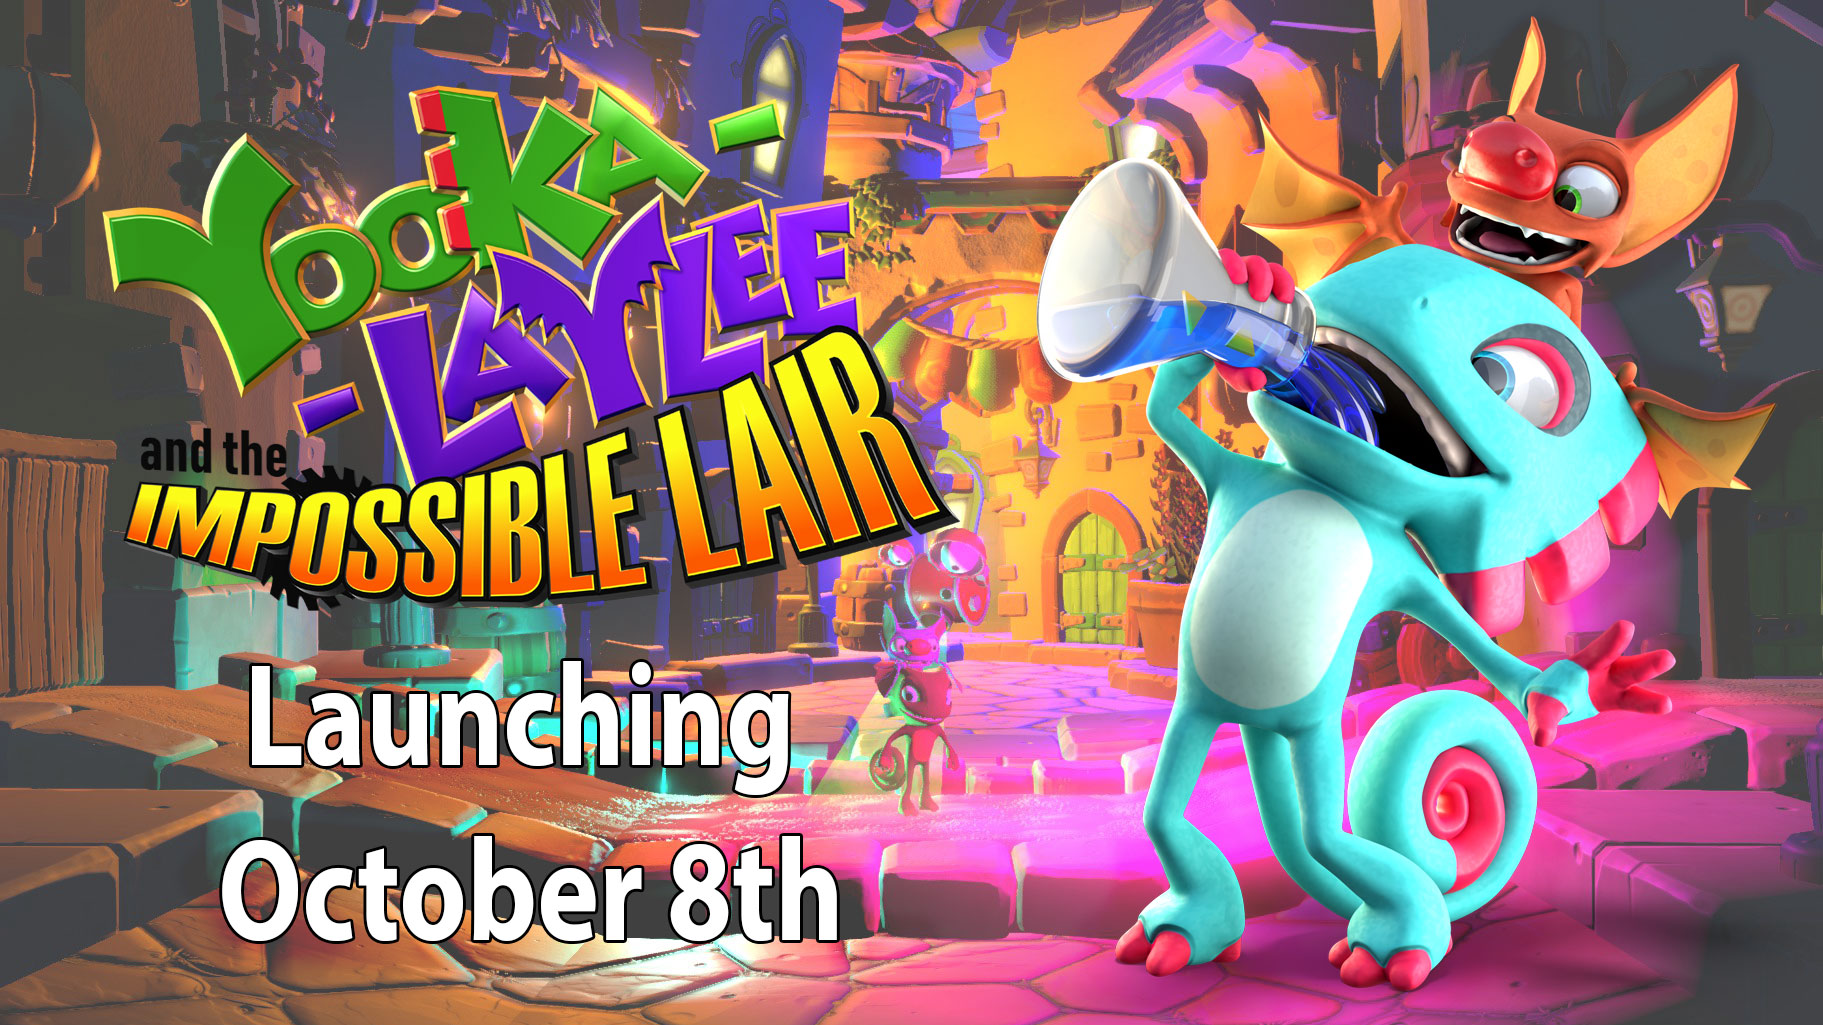 Yooka-Laylee and the – Of Announcement! Impossible Lair Games LTD Date Release Team17 - Digital - Independent Spirit The